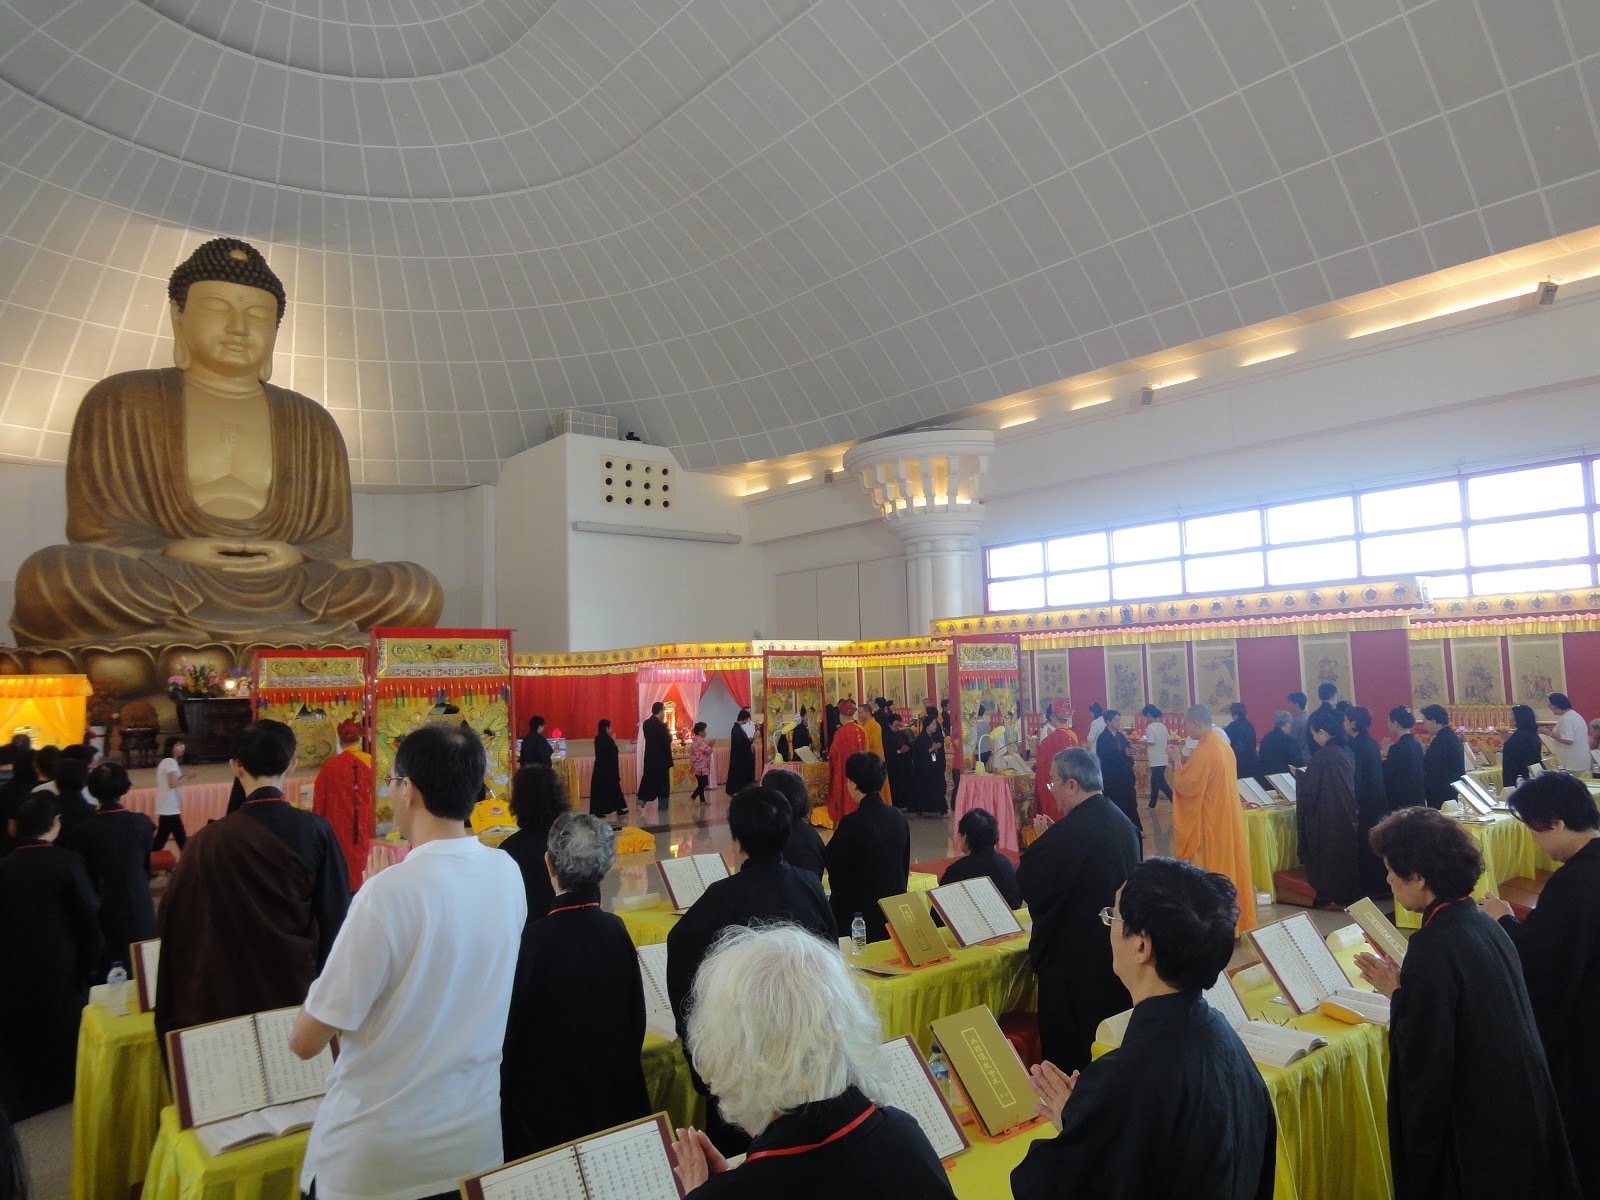 SHUILUFAHUI 法界圣凡水陆普度大斋胜-The Great Assembly to Liberate All Beings of Water  and Land: 2012